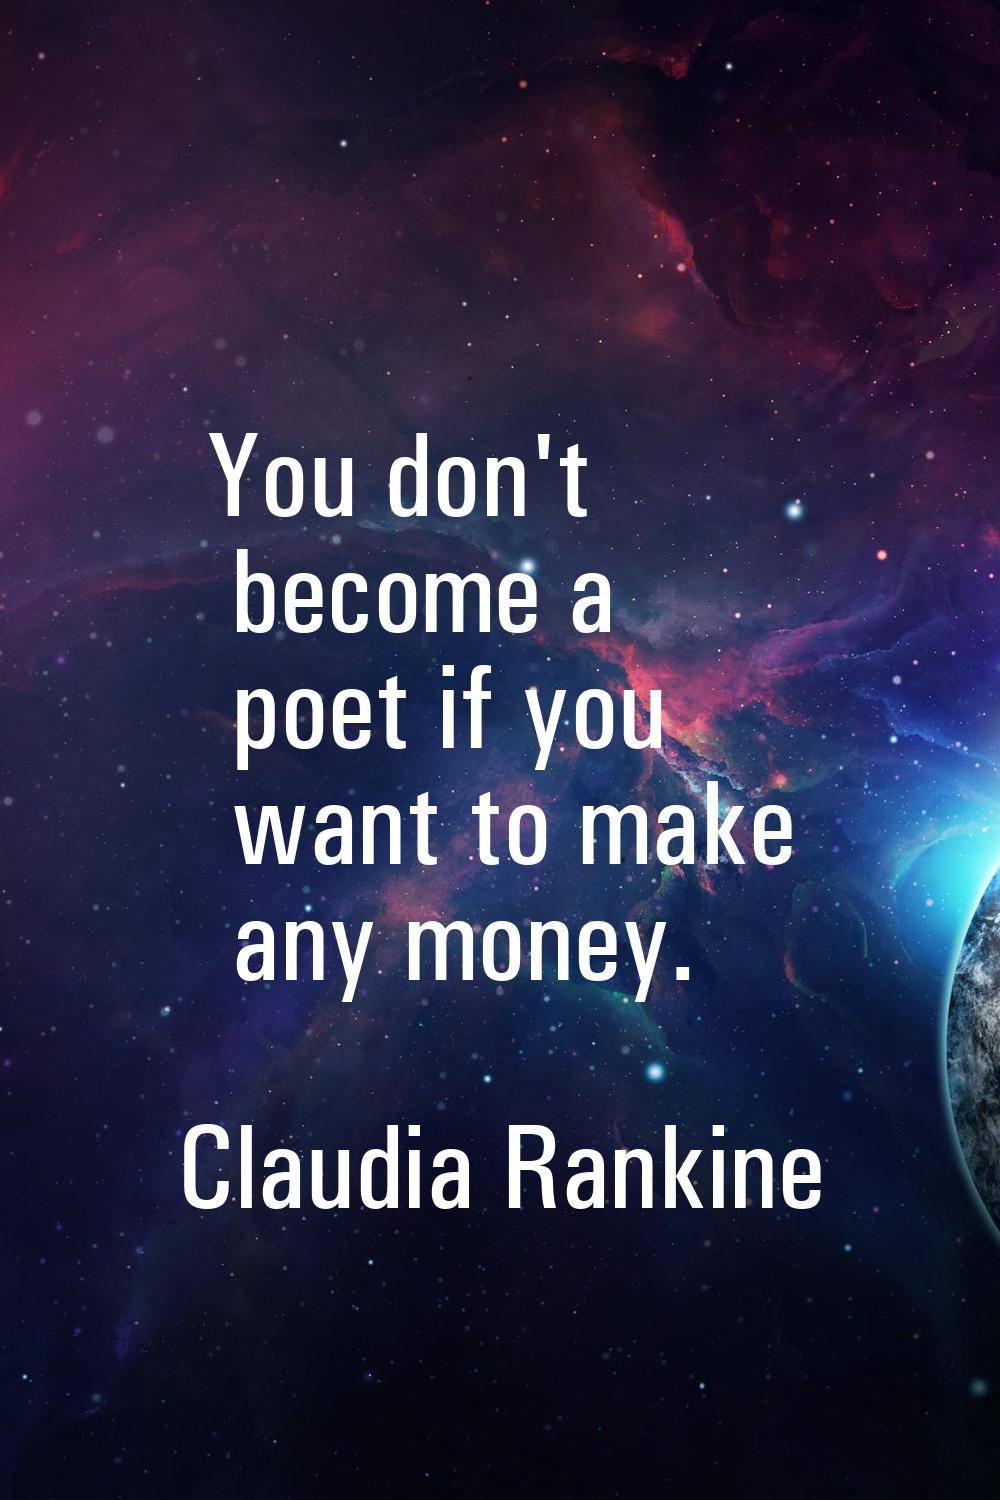 You don't become a poet if you want to make any money.